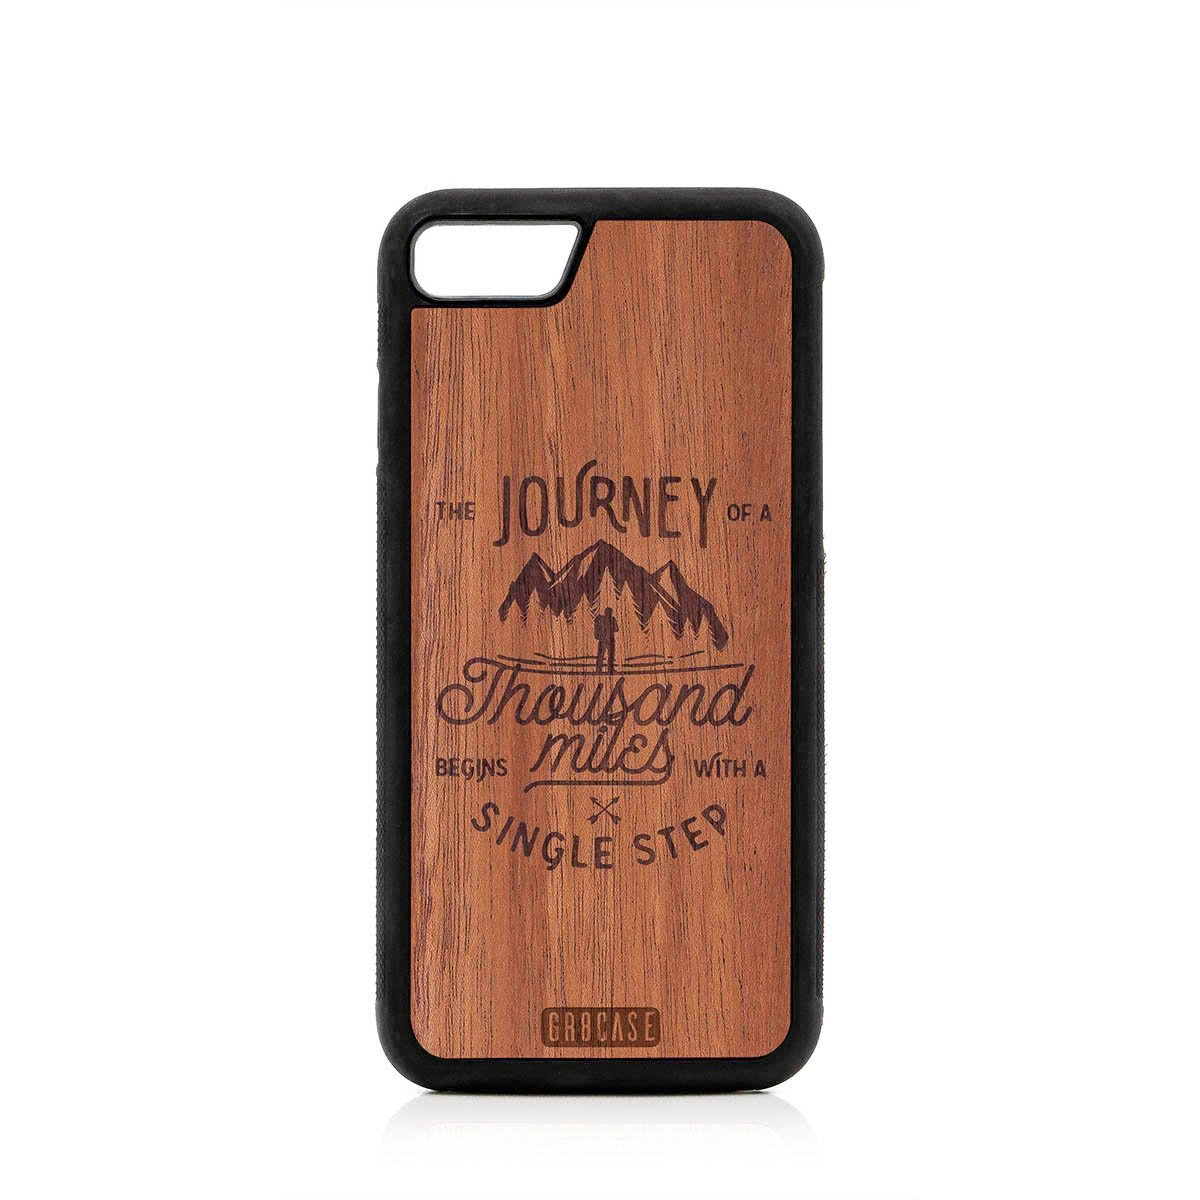 The Journey Of A Thousand Miles Begins With A Single Step Design Wood Case For iPhone SE 2020